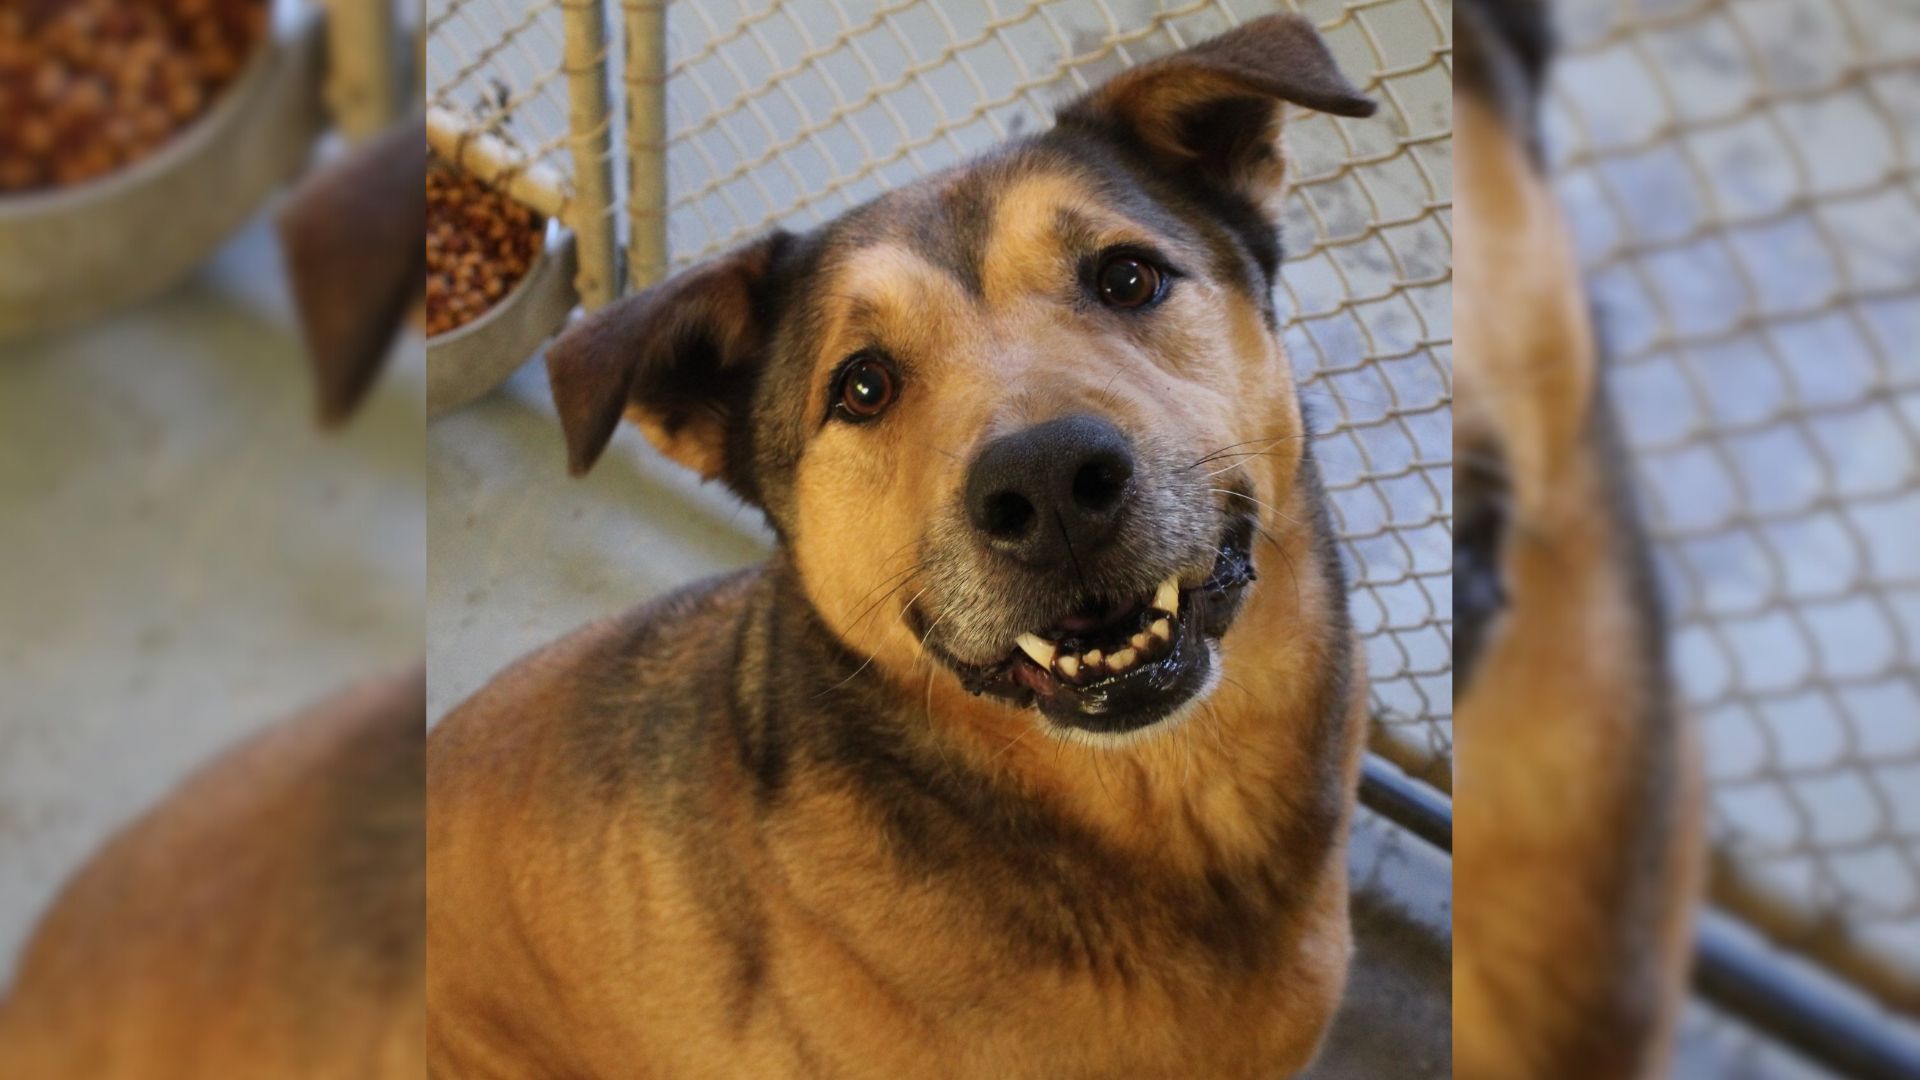 Senior Dog Was In An Ohio Shelter For 2381 Days Before Someone Special Came For Him